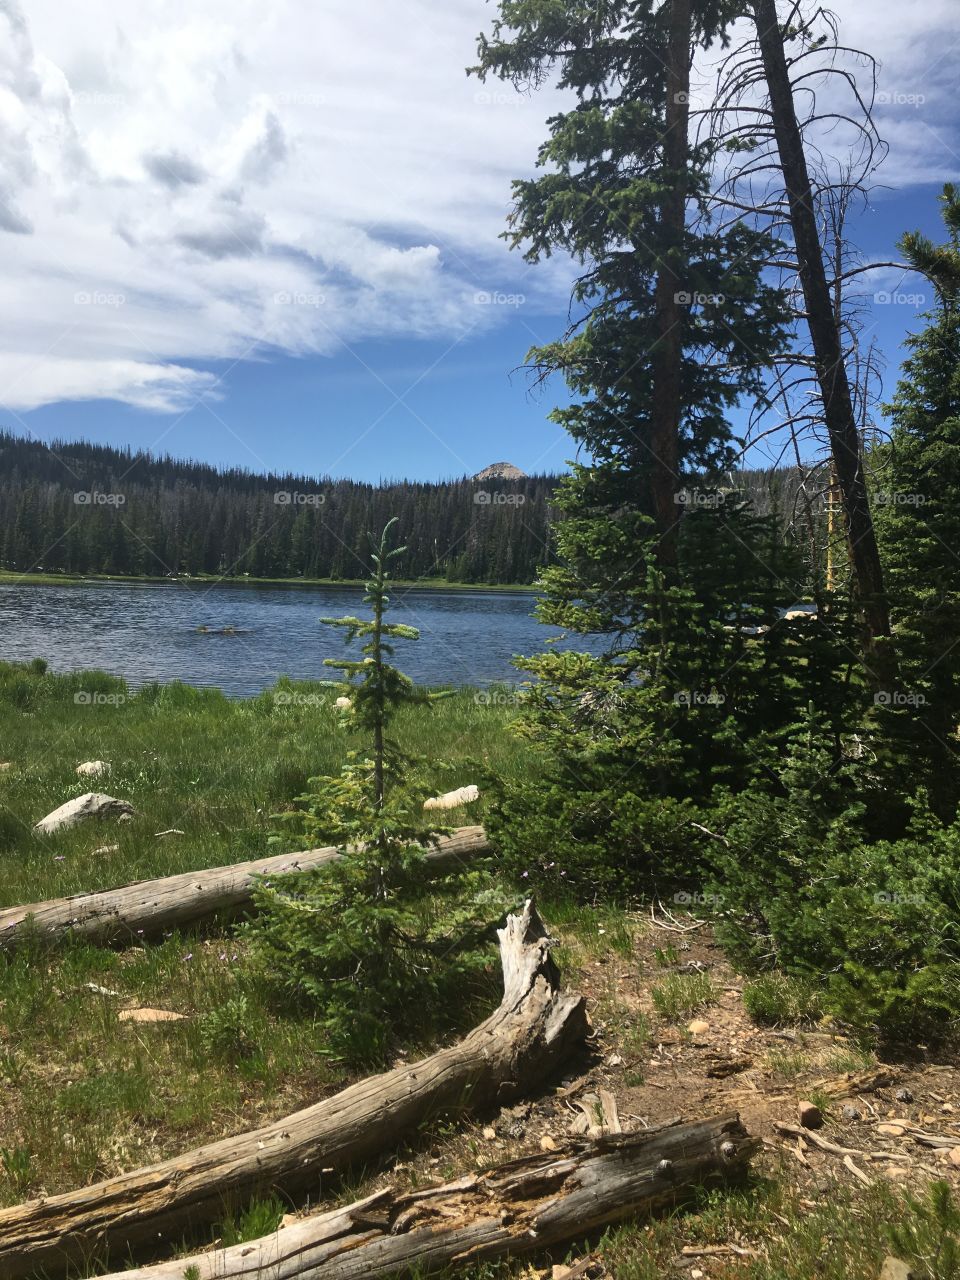 Up in the High Uinta mountains 